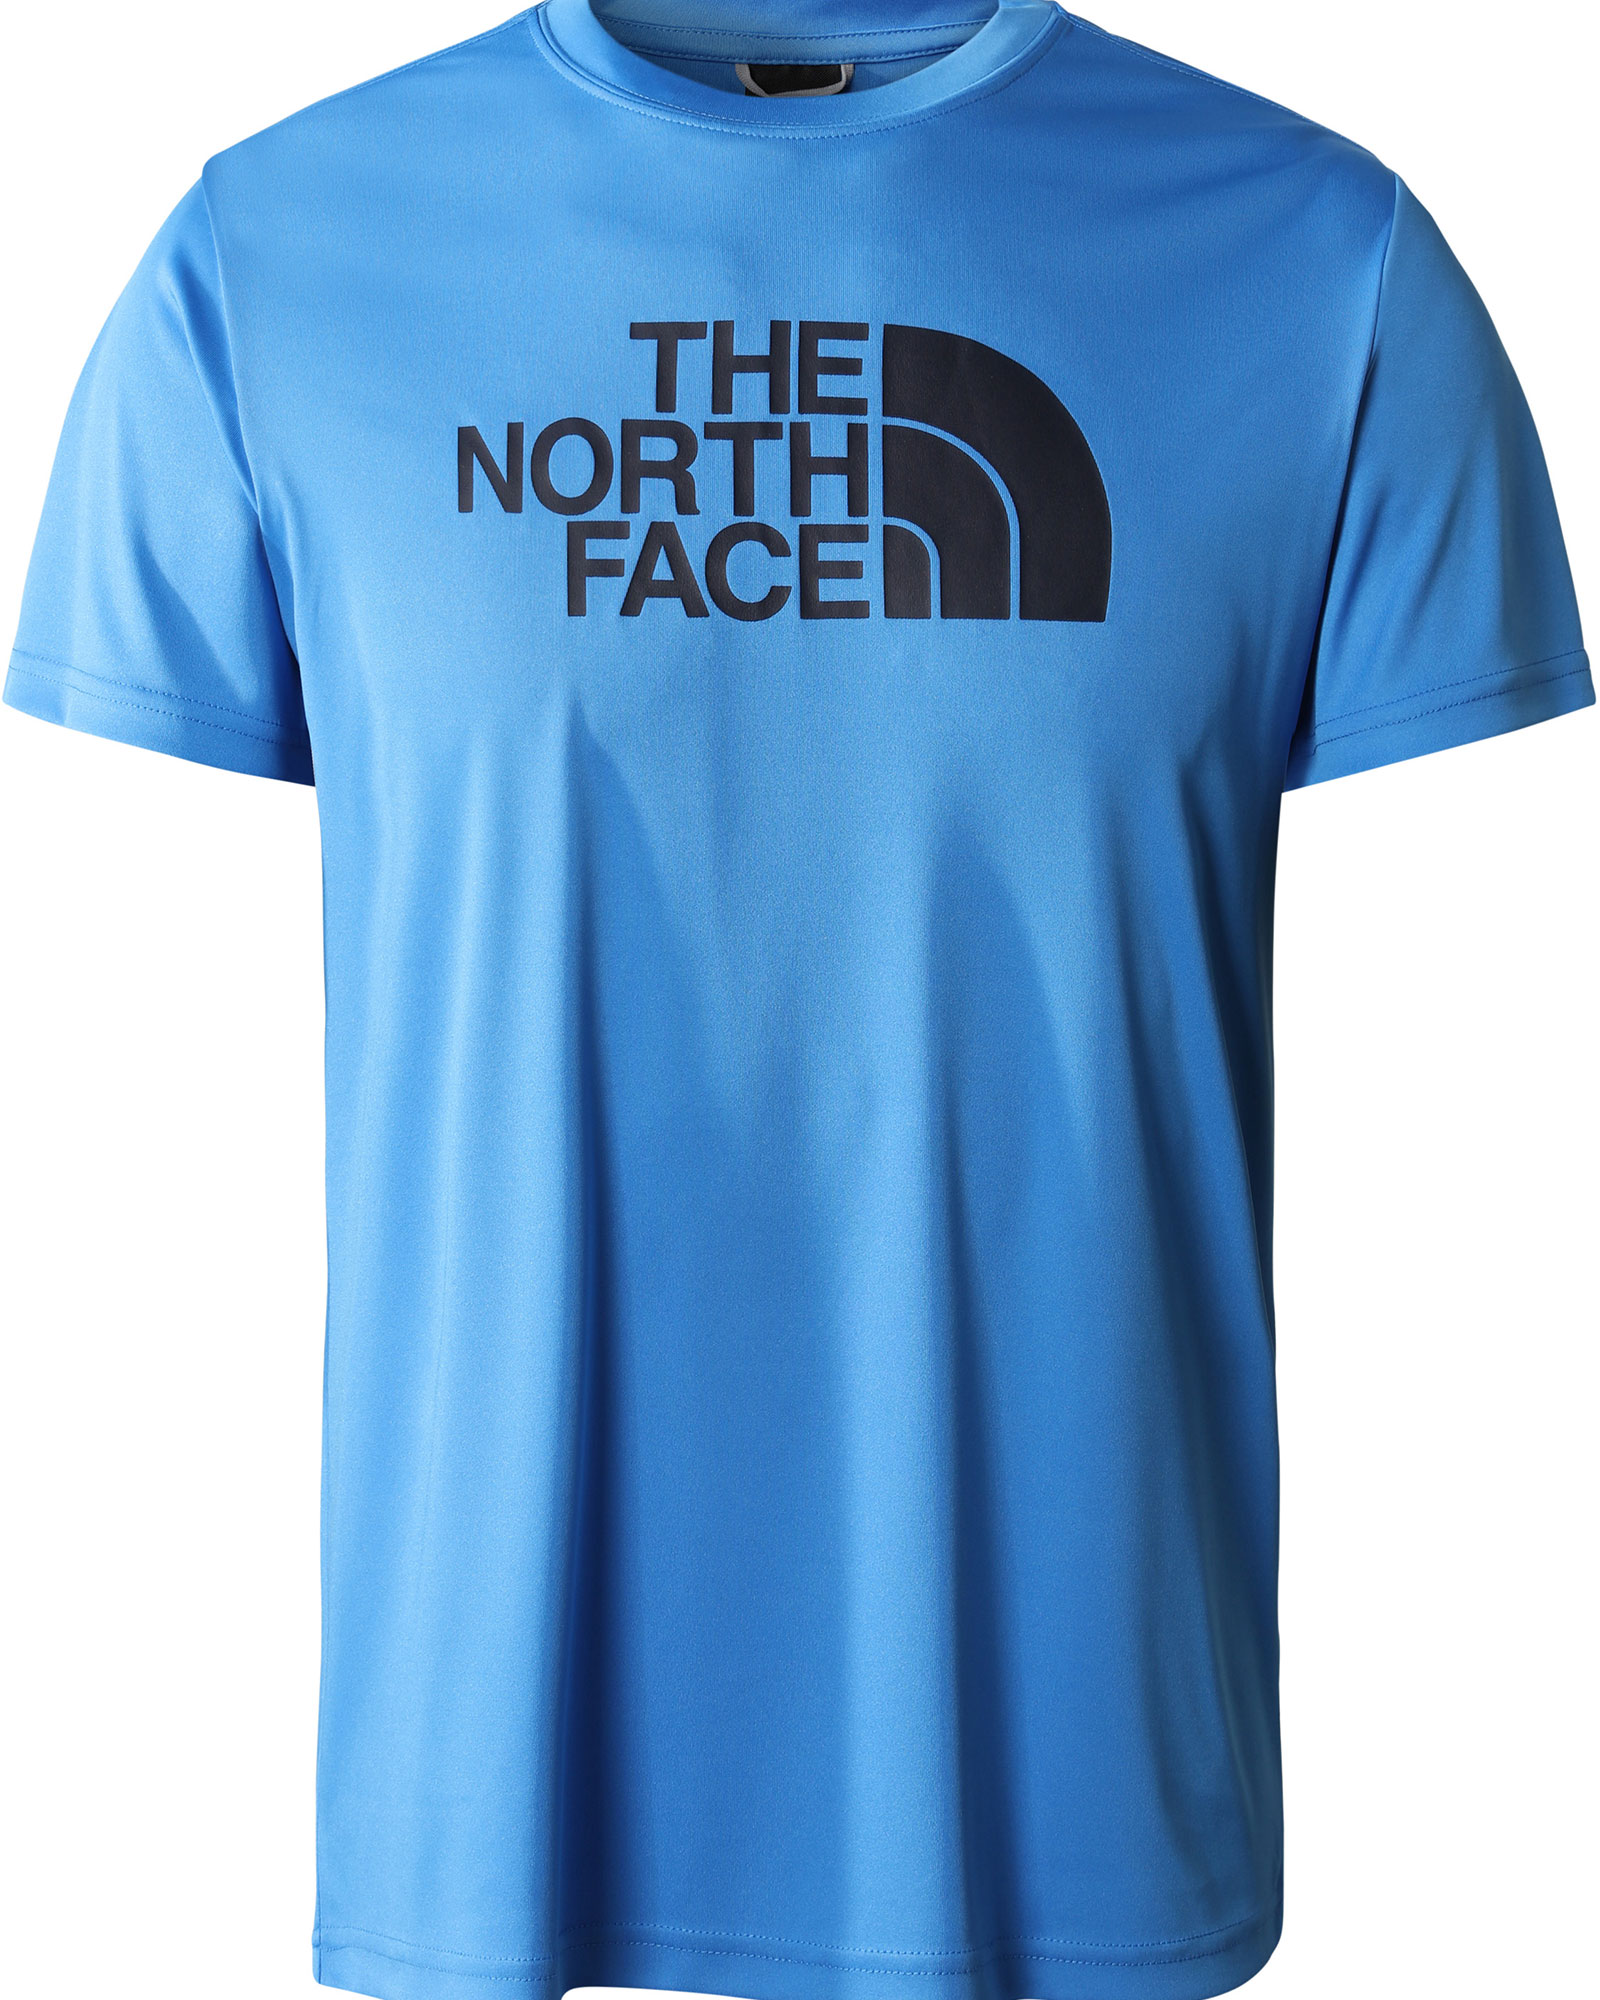 The North Face Reaxion Easy Men’s T Shirt - Super Sonic Blue XL